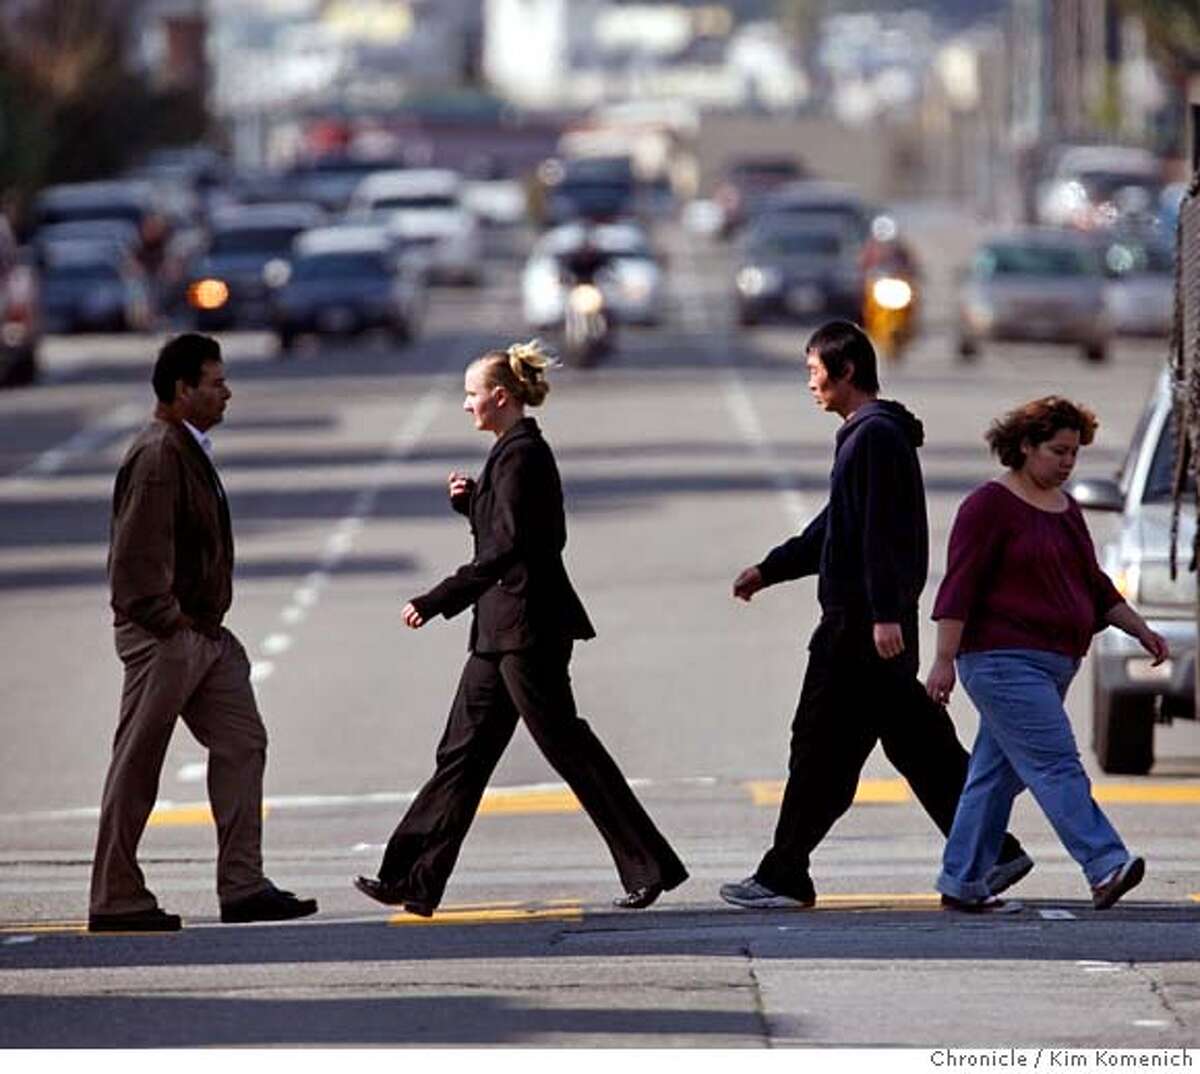 ###Live Caption:Pedestrians walk across Folsom Street at 8th Street in San Francisco on Tuesday, Mar. 11, 2008. Jim Meko, chairman of the Western SoMa Planning Task Force, says the city is encouraging higher density housing without addressing the transportation, streets and services required to accommodate such growth. Photo by Kim Komenich / The San Francisco Chronicle###Caption History:Pedestrians walk across Folsom Street at 8th Street in San Francisco on Tuesday, Mar. 11, 2008. Jim Meko, chairman of the Western SoMa Planning Task Force, says the city is encouraging higher density housing without addressing the transportation, streets and services required to accommodate such growth. Photo by Kim Komenich / The San Francisco Chronicle###Notes:Pedestrians walk across Folsom Street at 8th Street in San Francisco on Tuesday, Mar. 11, 2008. Jim Meko, chairman of the Western SoMa Planning Task Force, says the city is encouraging higher density housing without addressing the transportation, streets###Special Instructions:MANDATORY CREDIT FOR PHOTOG AND SF CHRONICLE/NO SALES-MAGS OUT